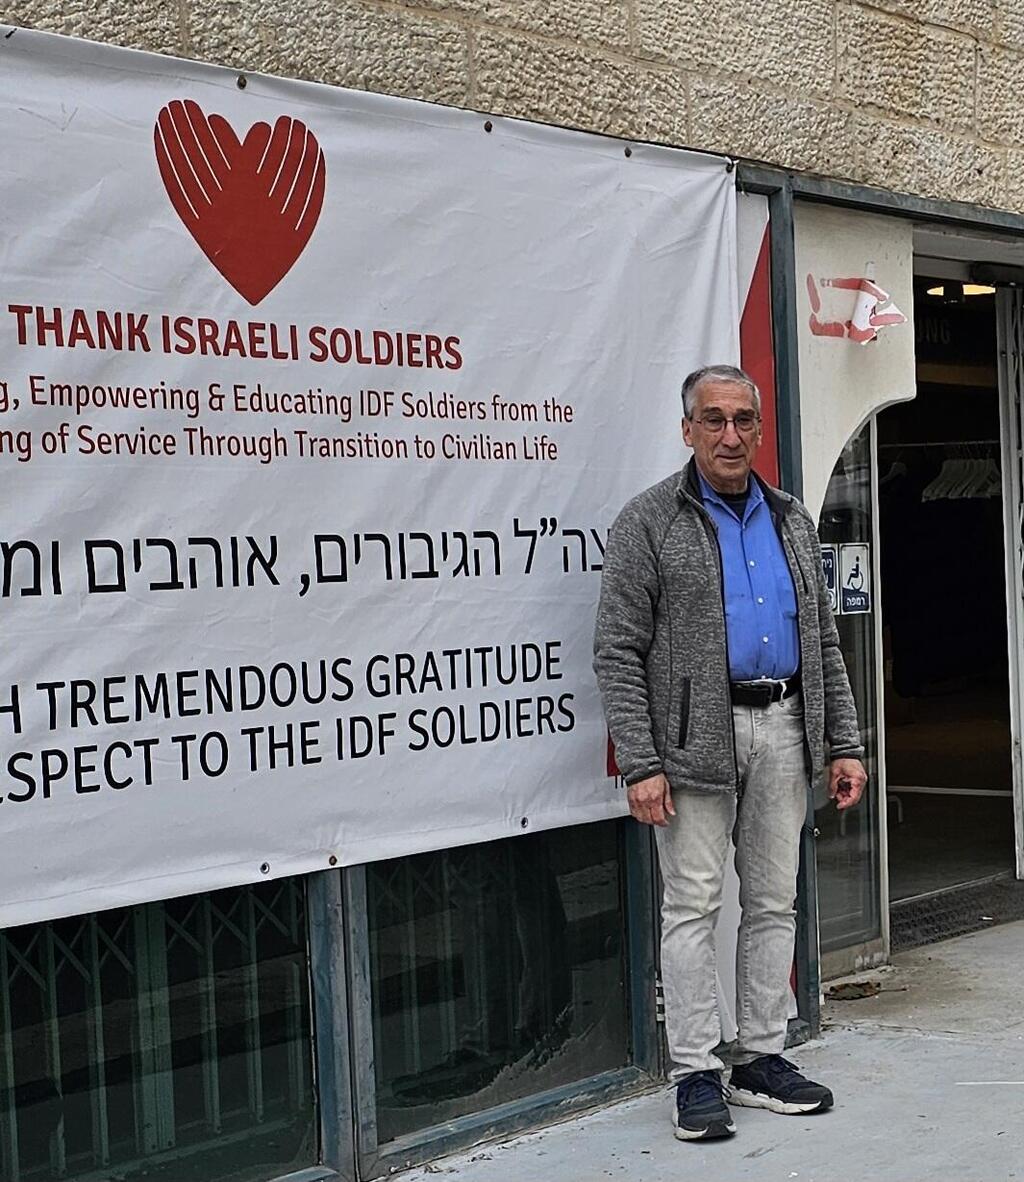  Rabbi Jonathan Pearl at Todah L’Tzahal (‘Thanks to the Israel Defense Forces’) headquarters in Jerusalem